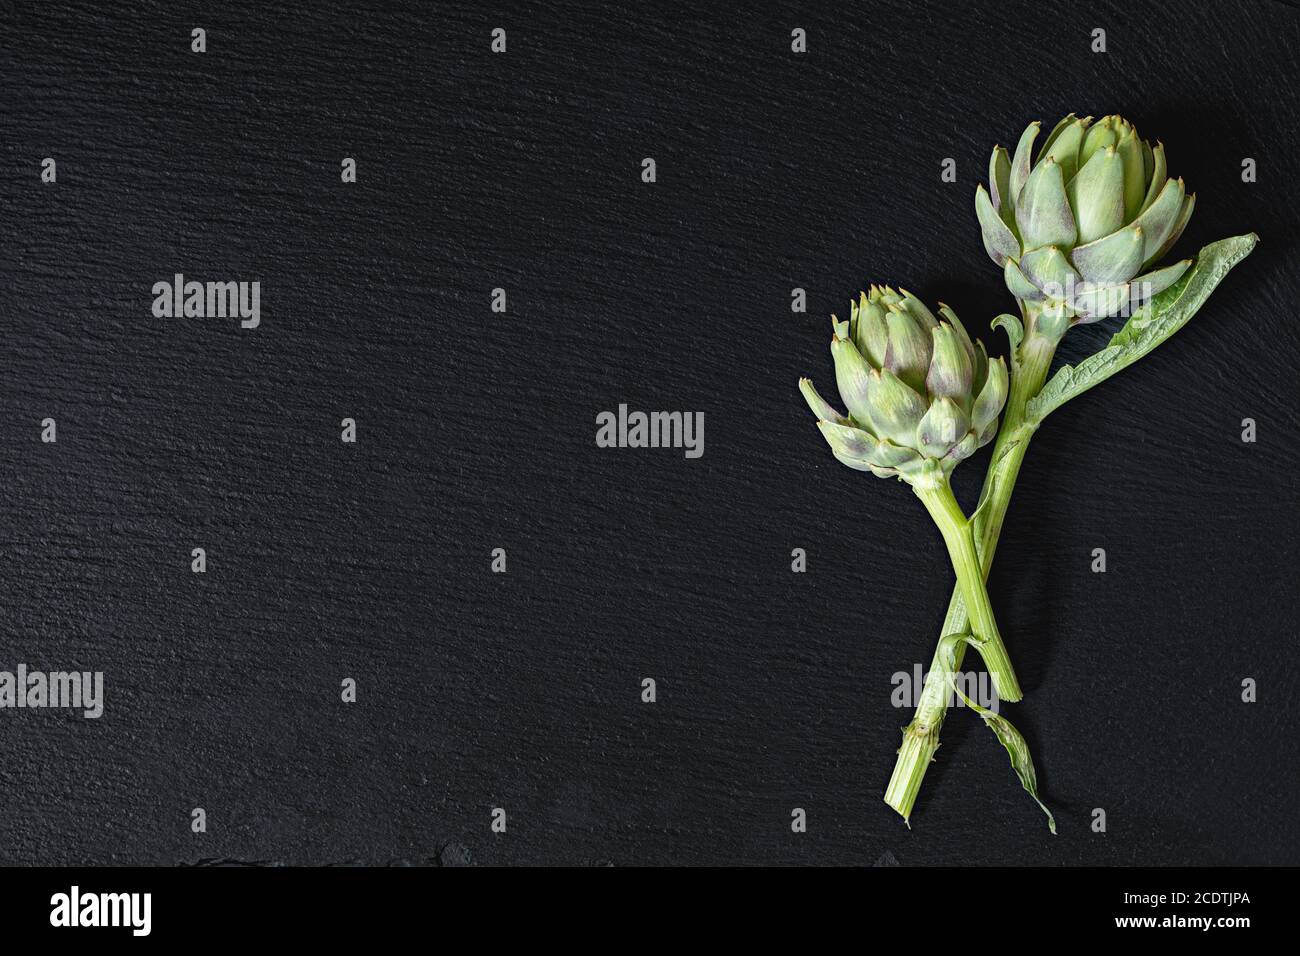 Two cones fresh green artichoke on a black stone surface.  Top view, copy space. Healthy eating concept. Stock Photo